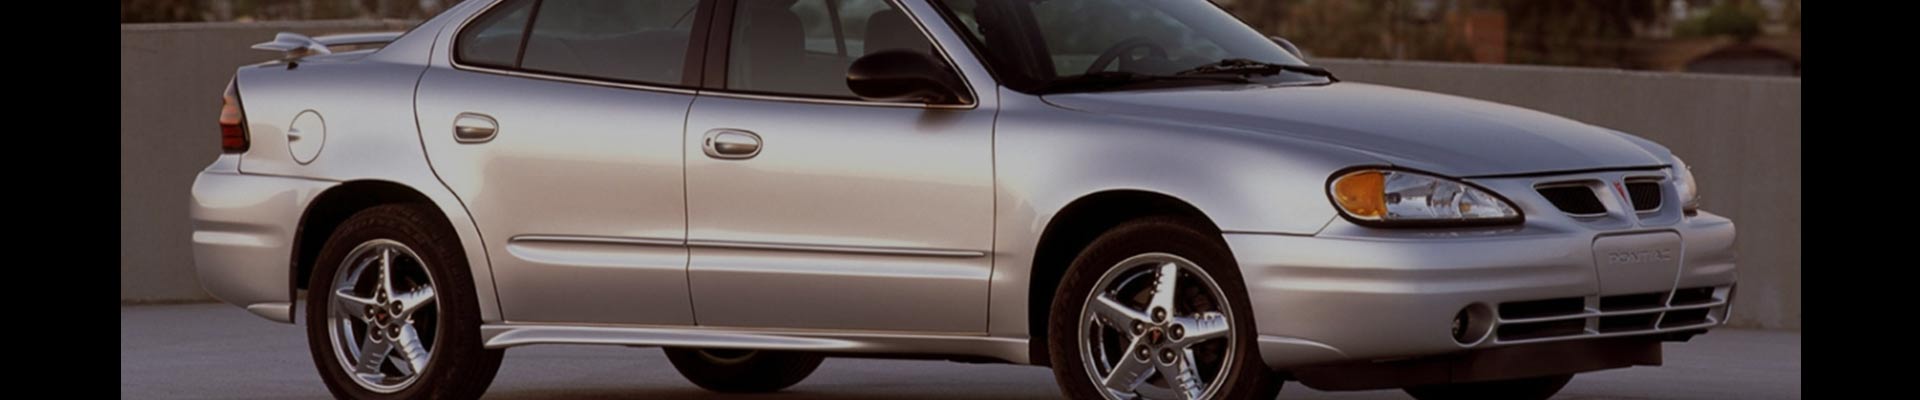 Shop Replacement and OEM 1989 Pontiac Grand Am Parts with Discounted Price on the Net